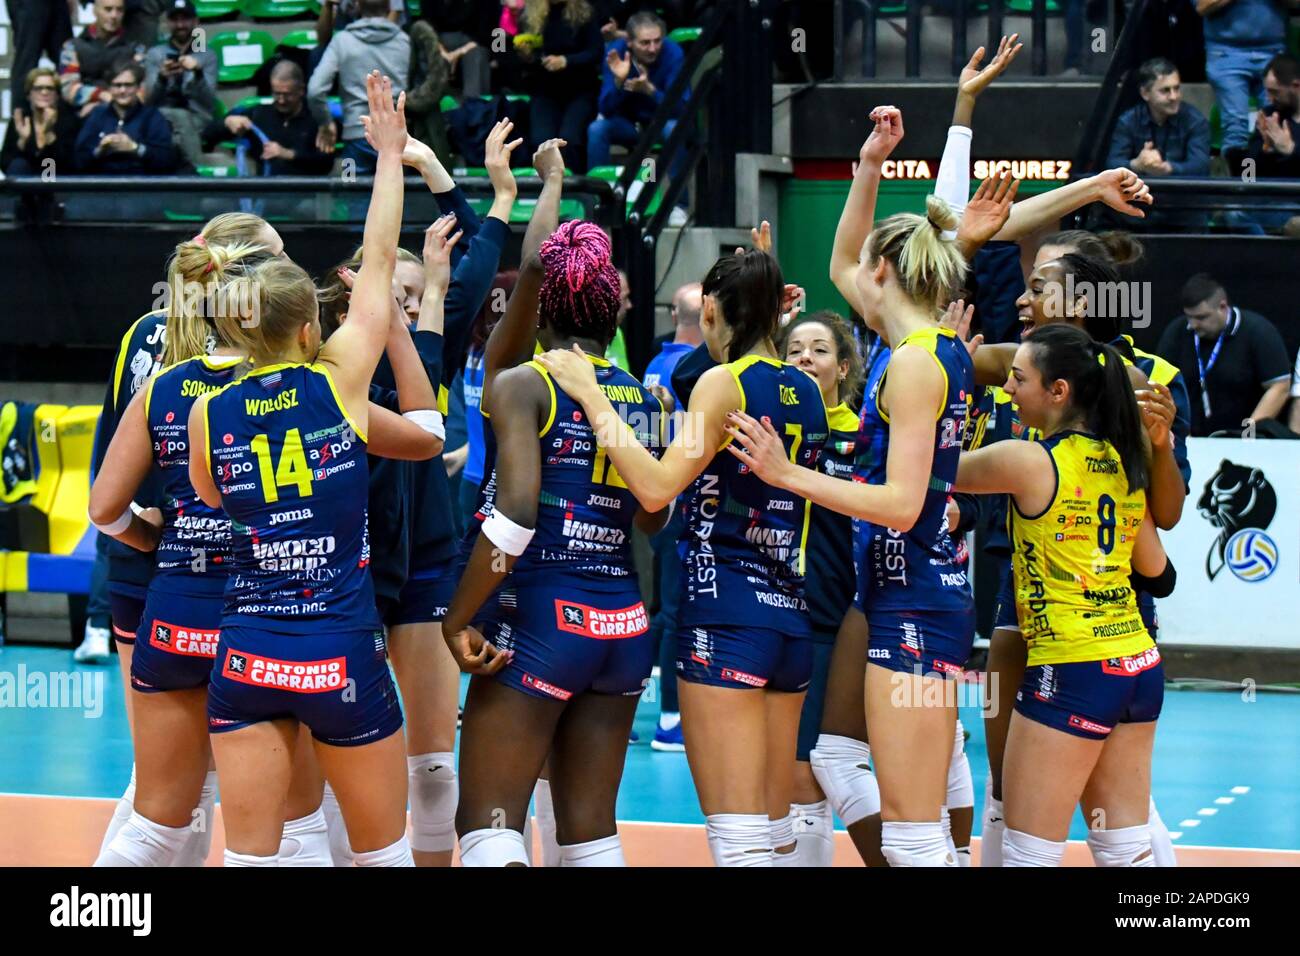 Treviso, Italy. 22nd Jan, 2020. Treviso, Italy, 22 Jan 2020, happiness  finale imoco volley conegliano during Imoco Volley Conegliano vs C.S.M.  Volei Alba Blaj - Volleyball Champions League Women - Credit: LM/Flavio